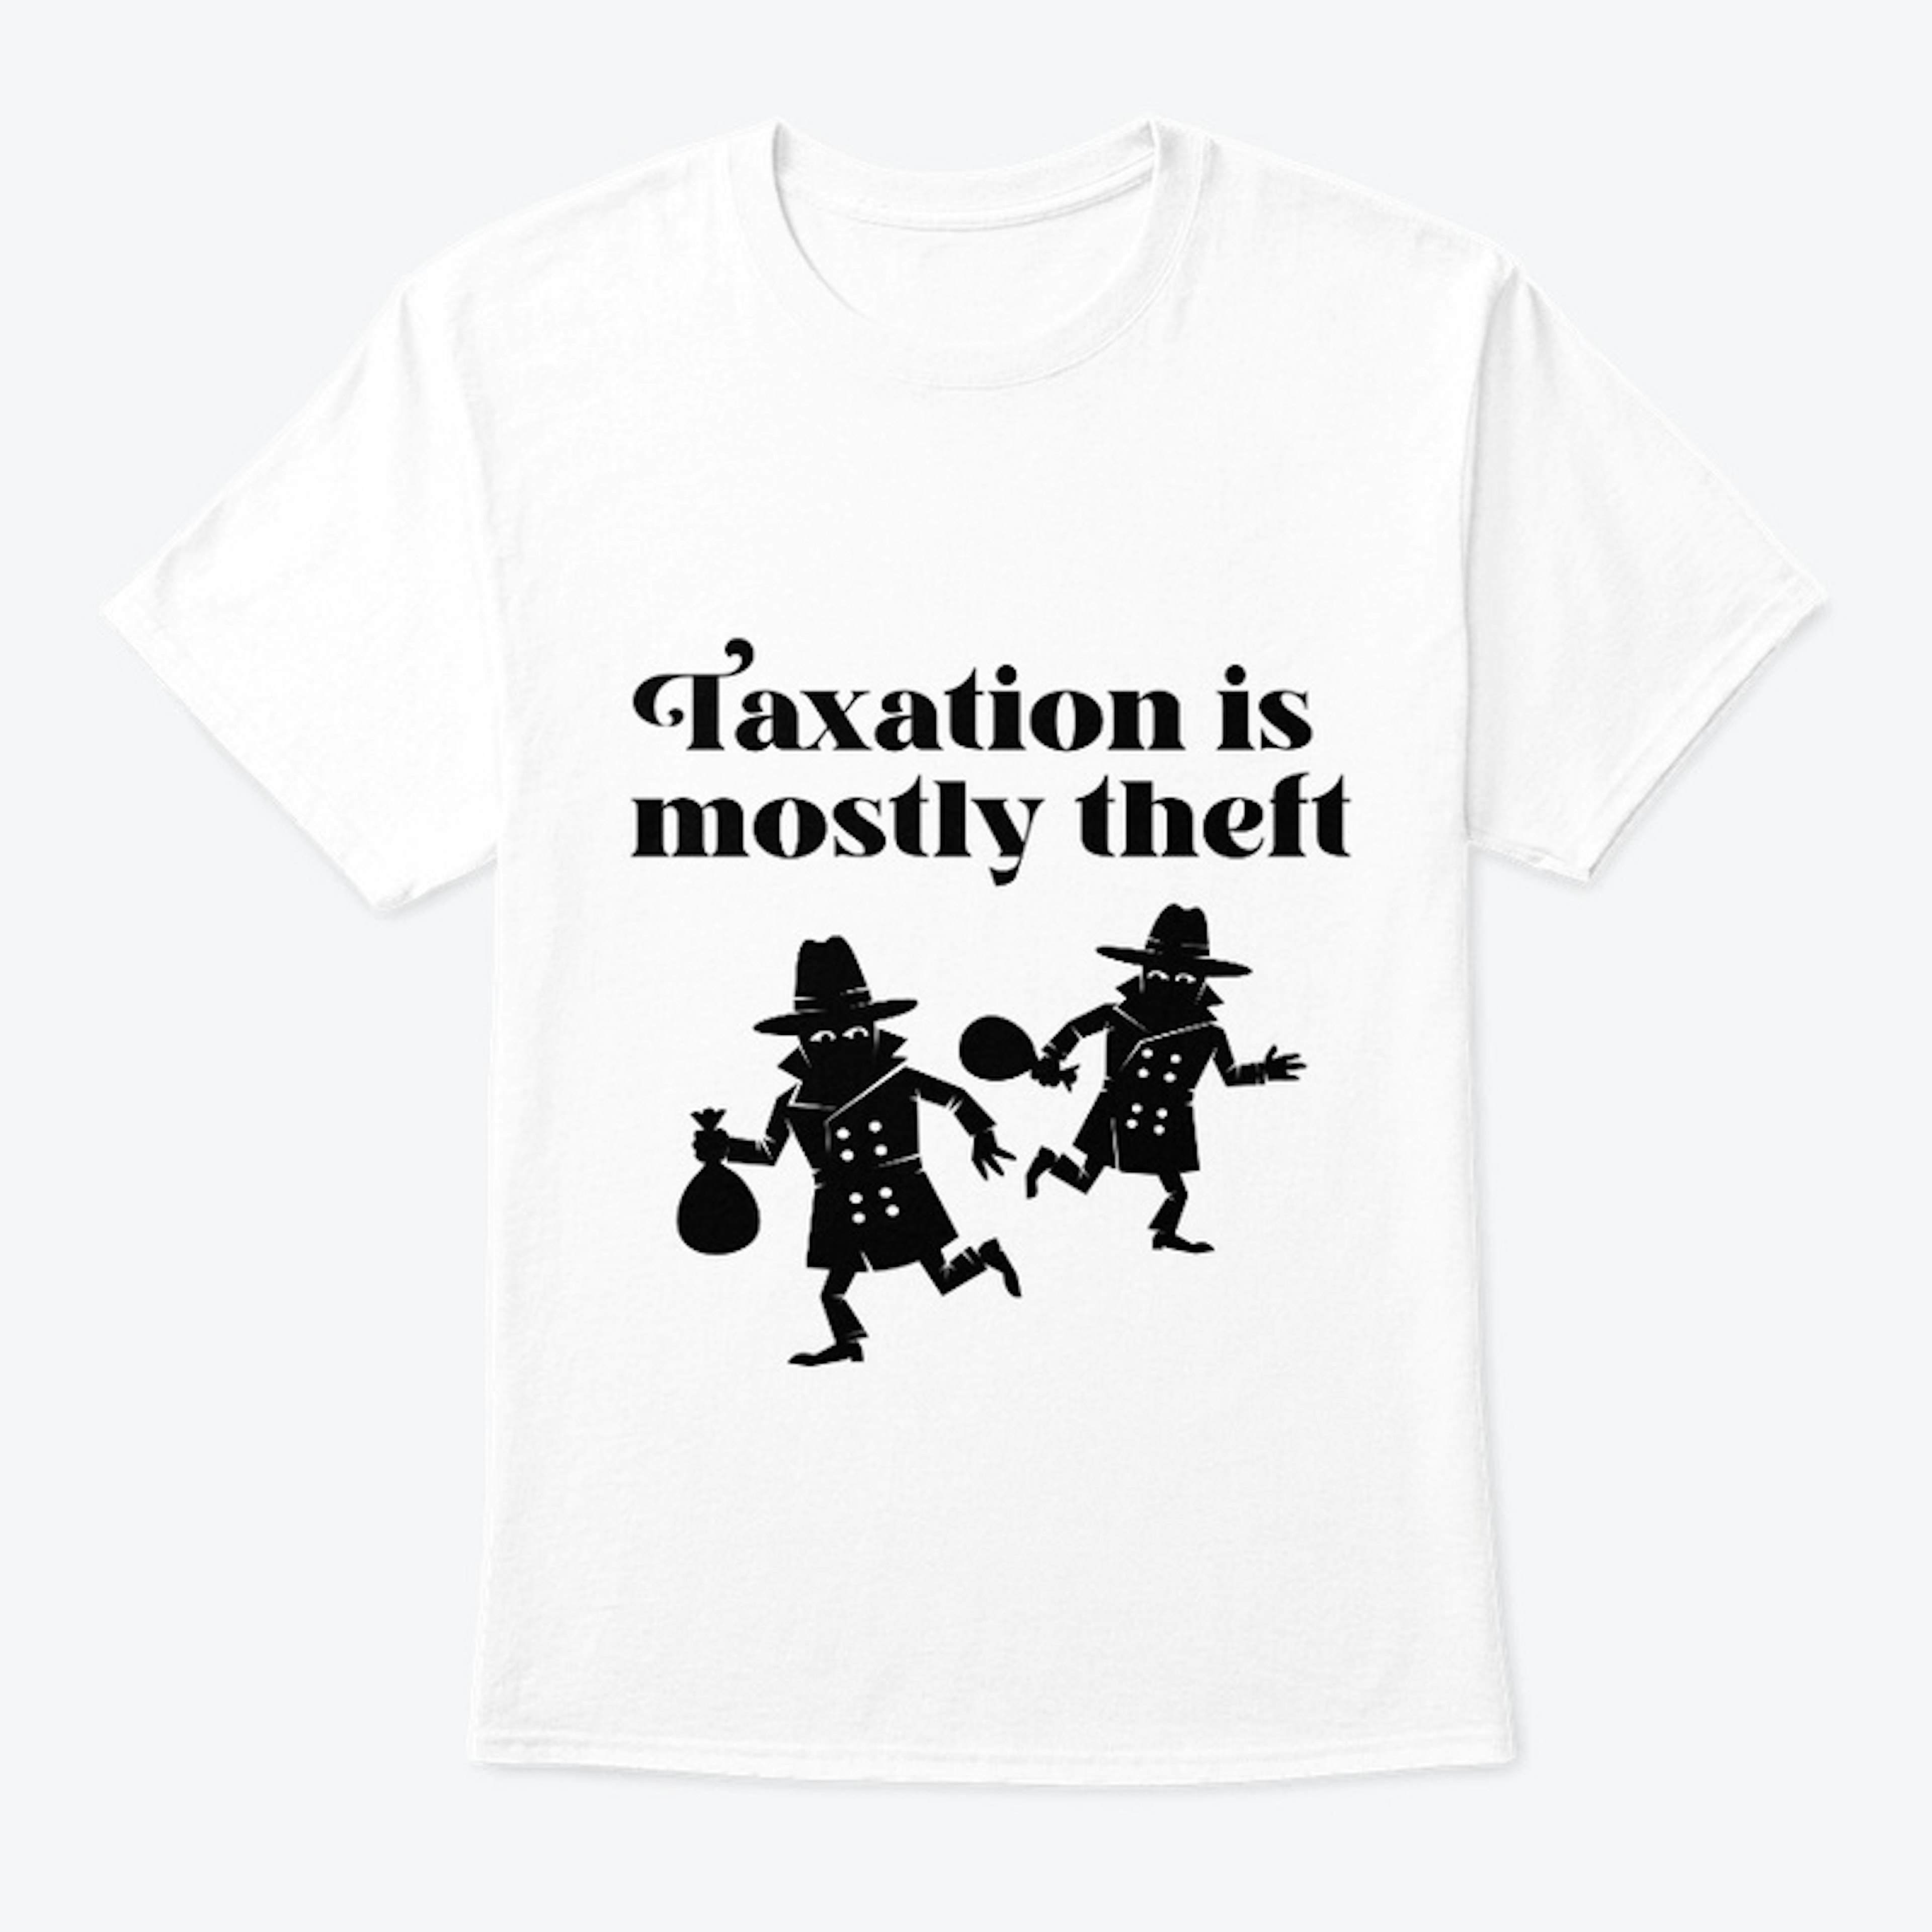 "Taxation is mostly theft" T-shirt